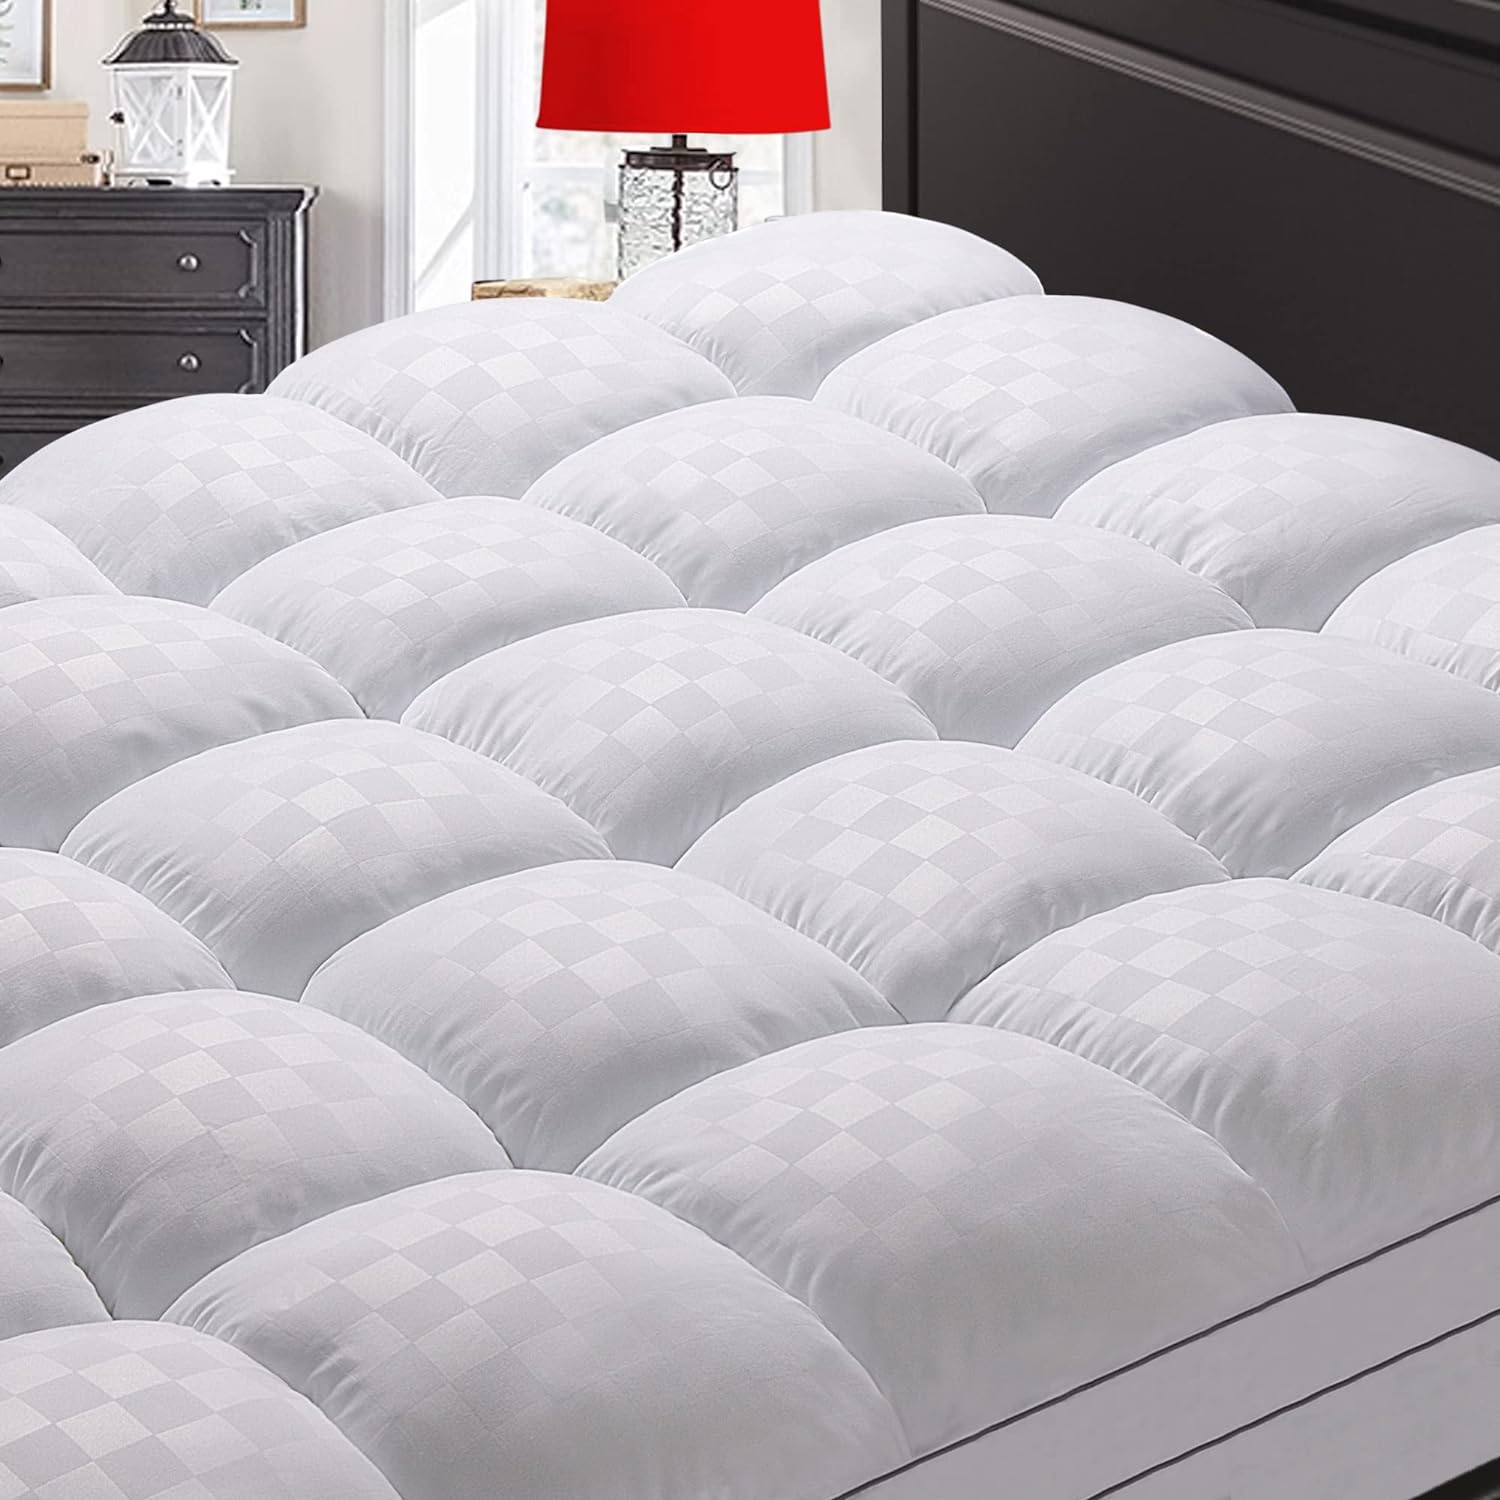 This mattress topper is nice and soft. This mattress topper fit my queen size mattress perfectly! Well made. Very nice quality and excellent price!